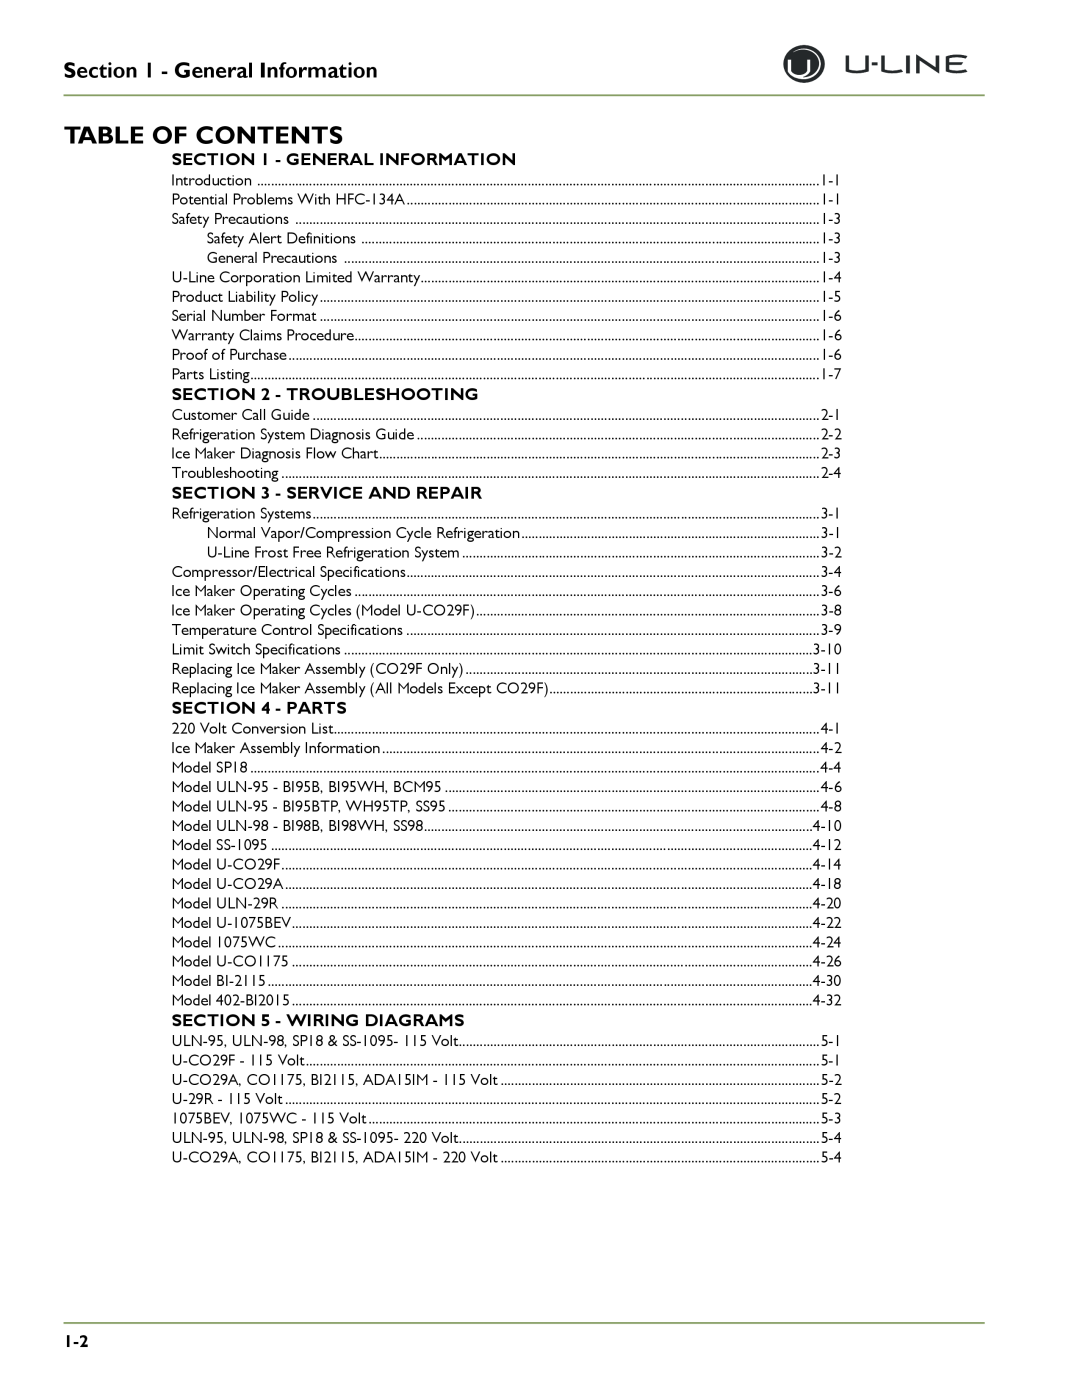 U-Line U-CO29A, SP 18 Table Of Contents, General Information, Troubleshooting, Service And Repair, Parts, Wiring Diagrams 